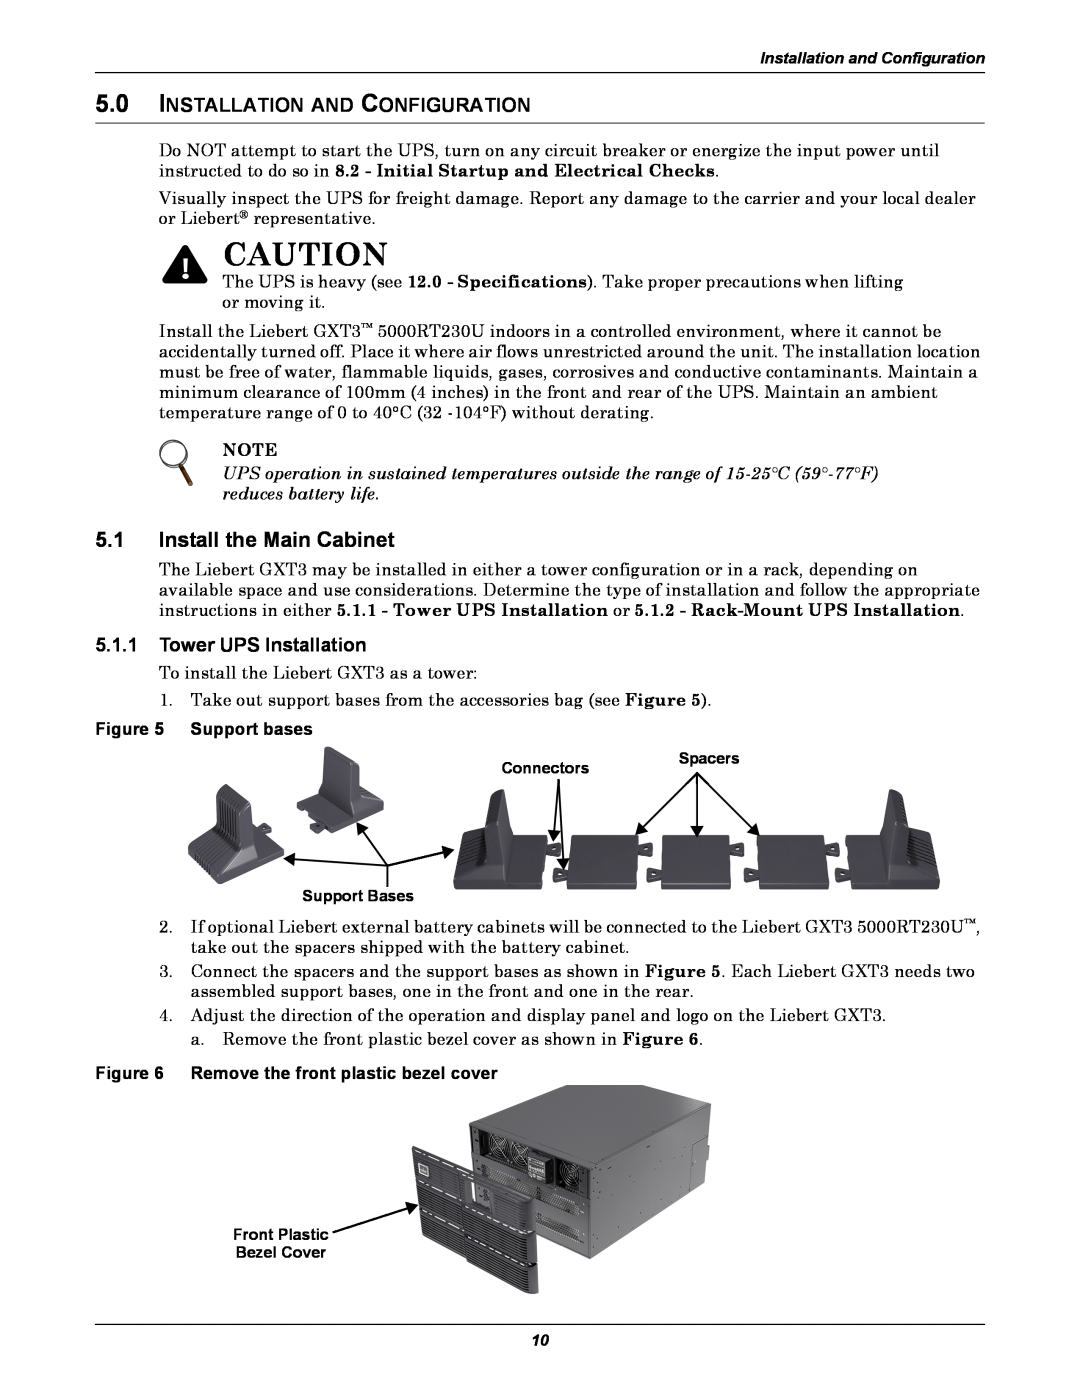 Emerson GXT3 230V user manual 5.1Install the Main Cabinet, 5.0INSTALLATION AND CONFIGURATION, 5.1.1Tower UPS Installation 